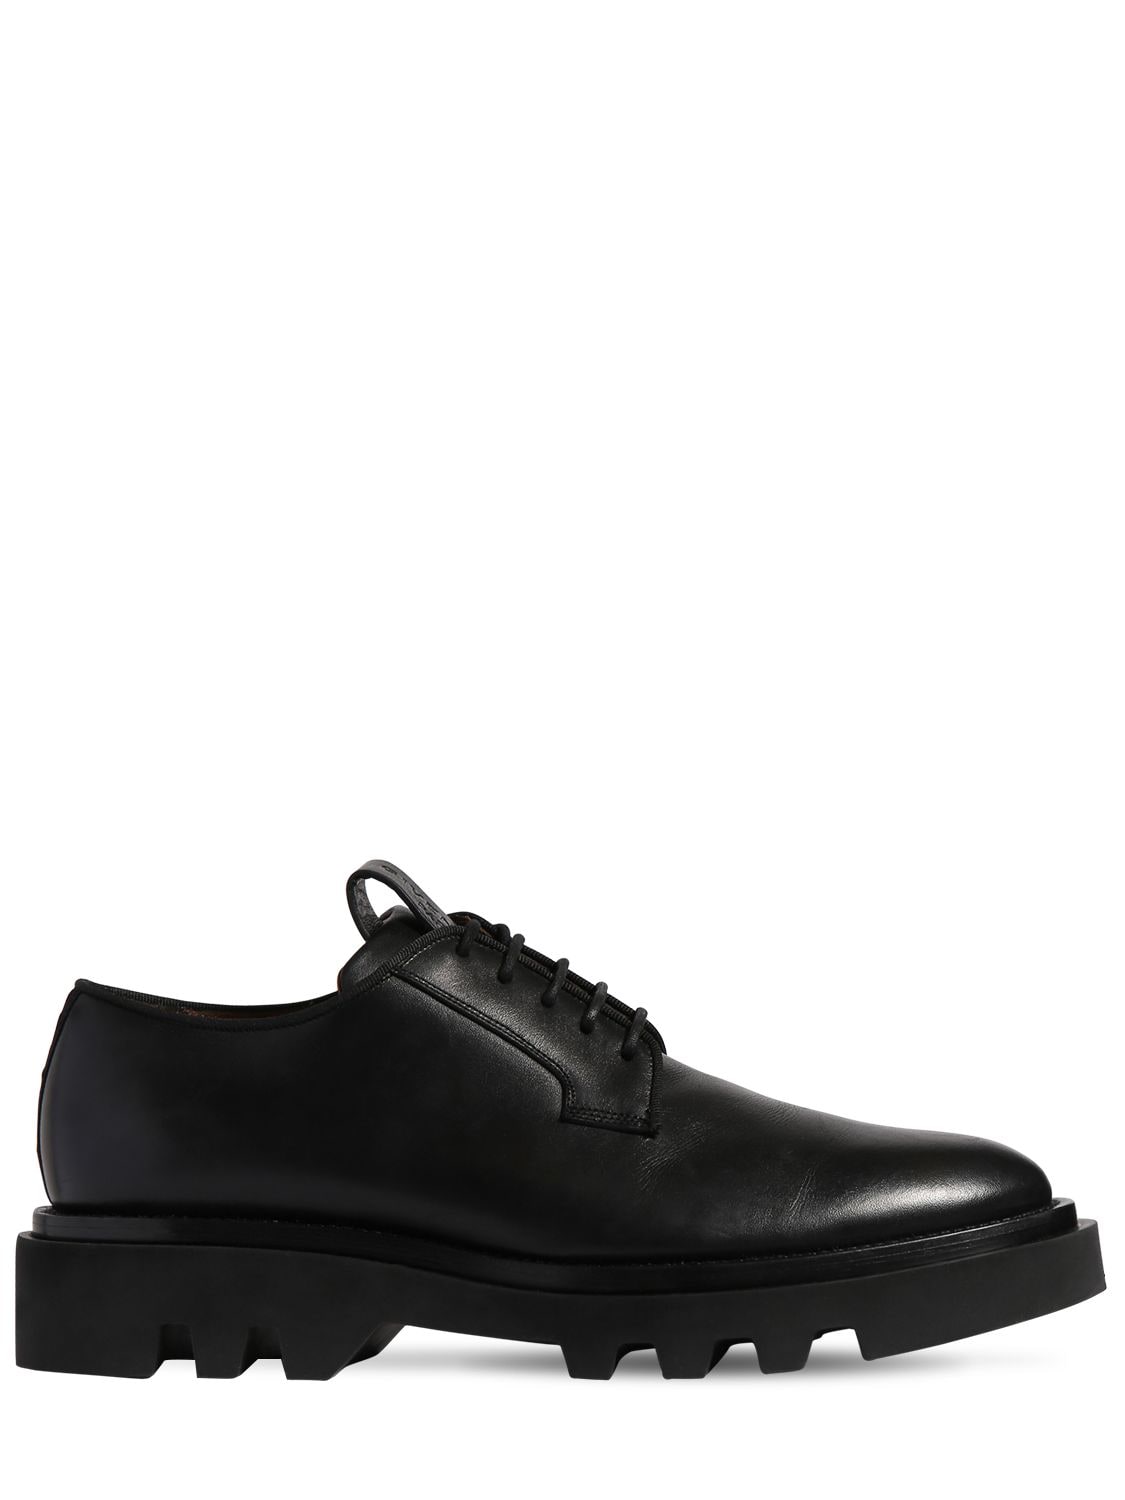 Givenchy - 50mm leather lace-up shoes - Black | Luisaviaroma